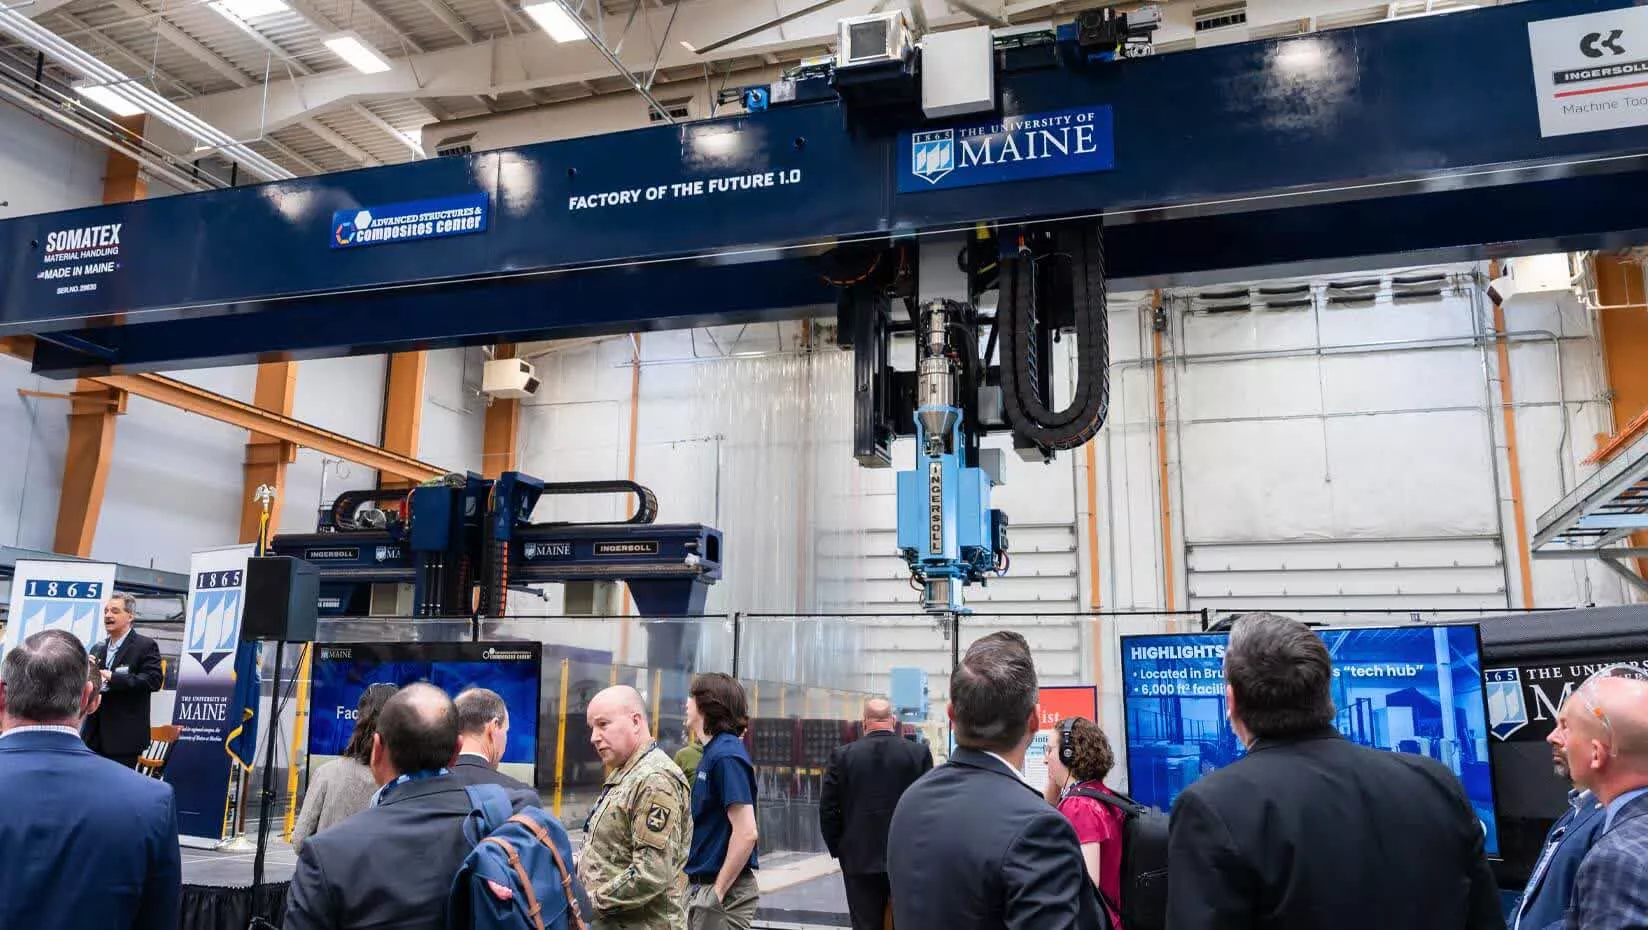 The University of Maine breaks its own record for the world's largest 3D printer